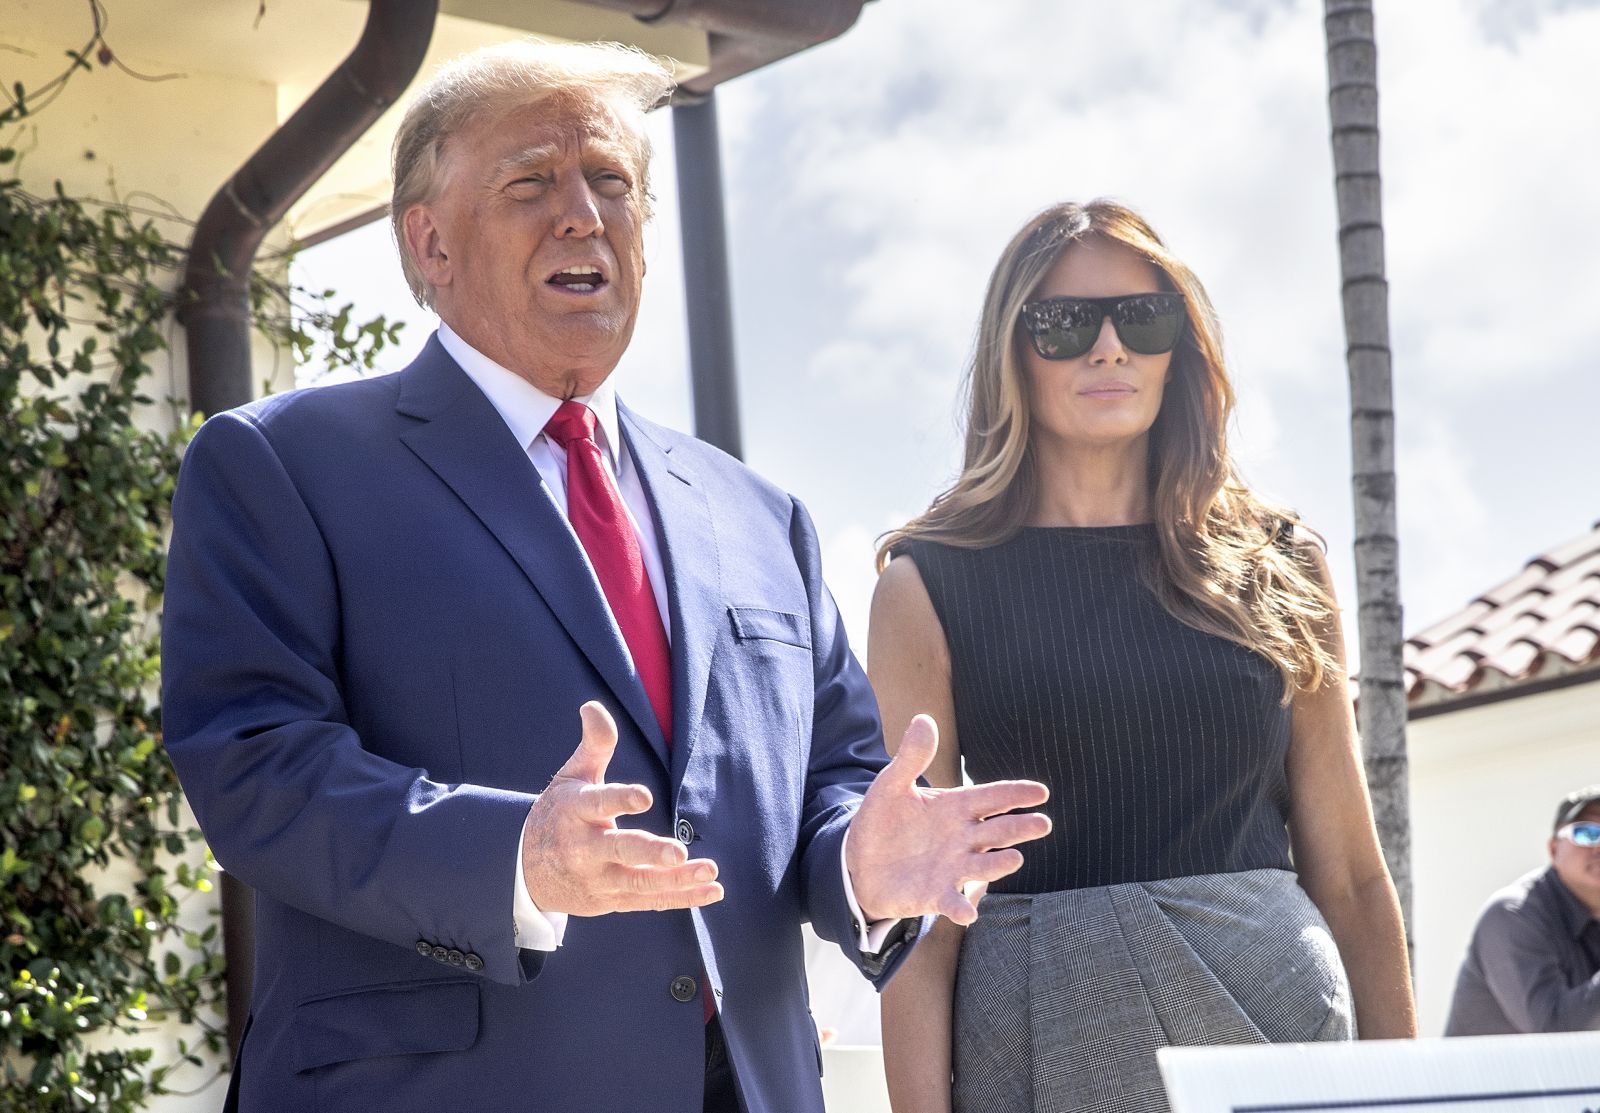 epa10294157 Former US President Donald J. Trump (L) and former First Lady Melania Trump (R), walk out of the electoral precinct after voting in-person at the Morton and Barbara Mandel Recreation Center in Palm Beach, Florida, USA, 08 October 2022. The US midterm elections are held every four years at the midpoint of each presidential term and this year include elections for all 435 seats in the House of Representatives, 35 of the 100 seats in the Senate and 36 of the 50 state governors as well as numerous other local seats and ballot issues.  EPA/CRISTOBAL HERRERA-ULASHKEVICH